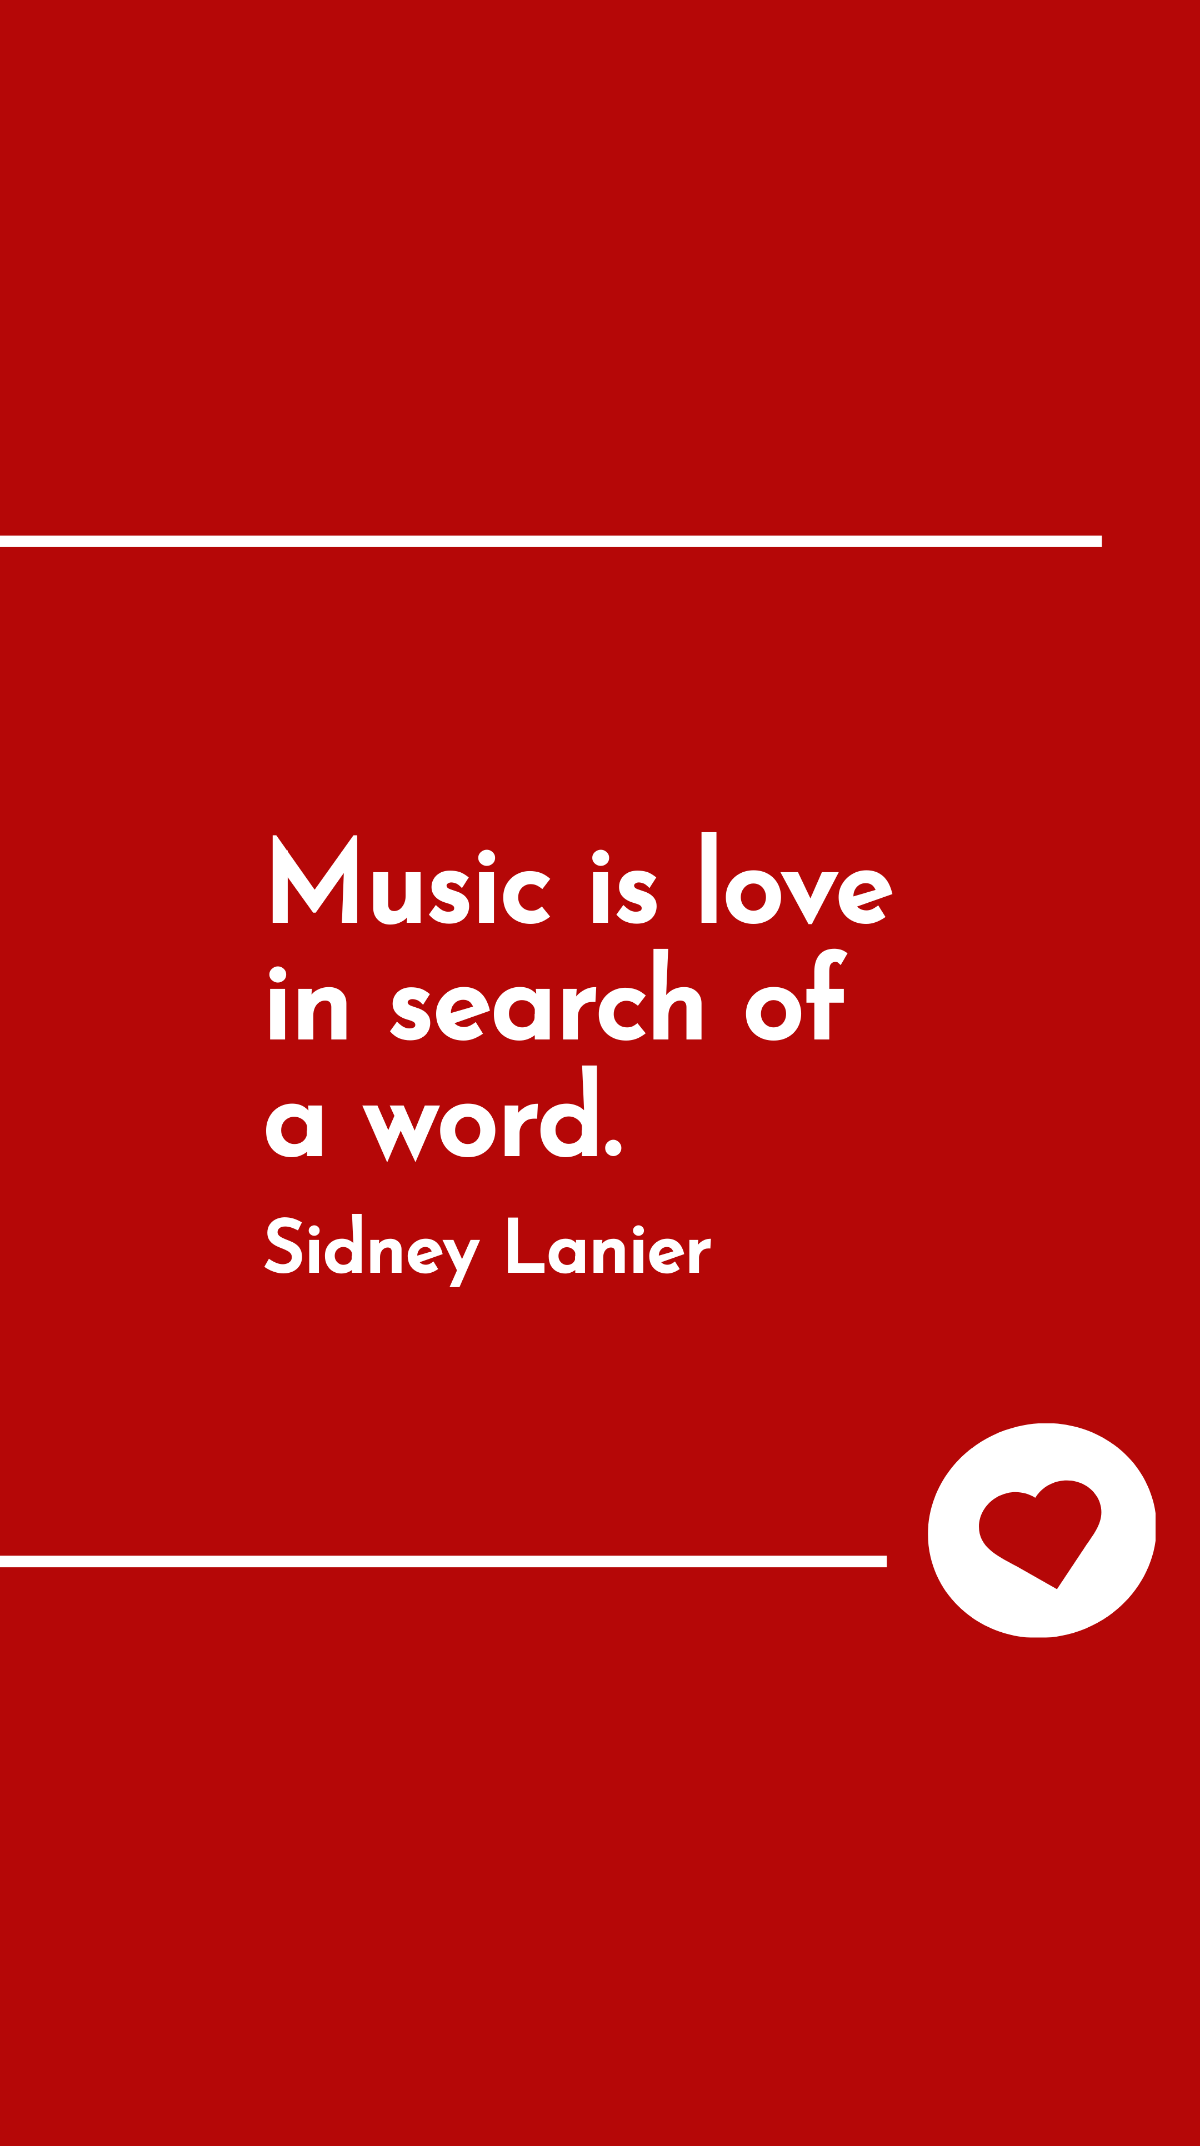 Free Sidney Lanier - Music is love in search of a word. Template